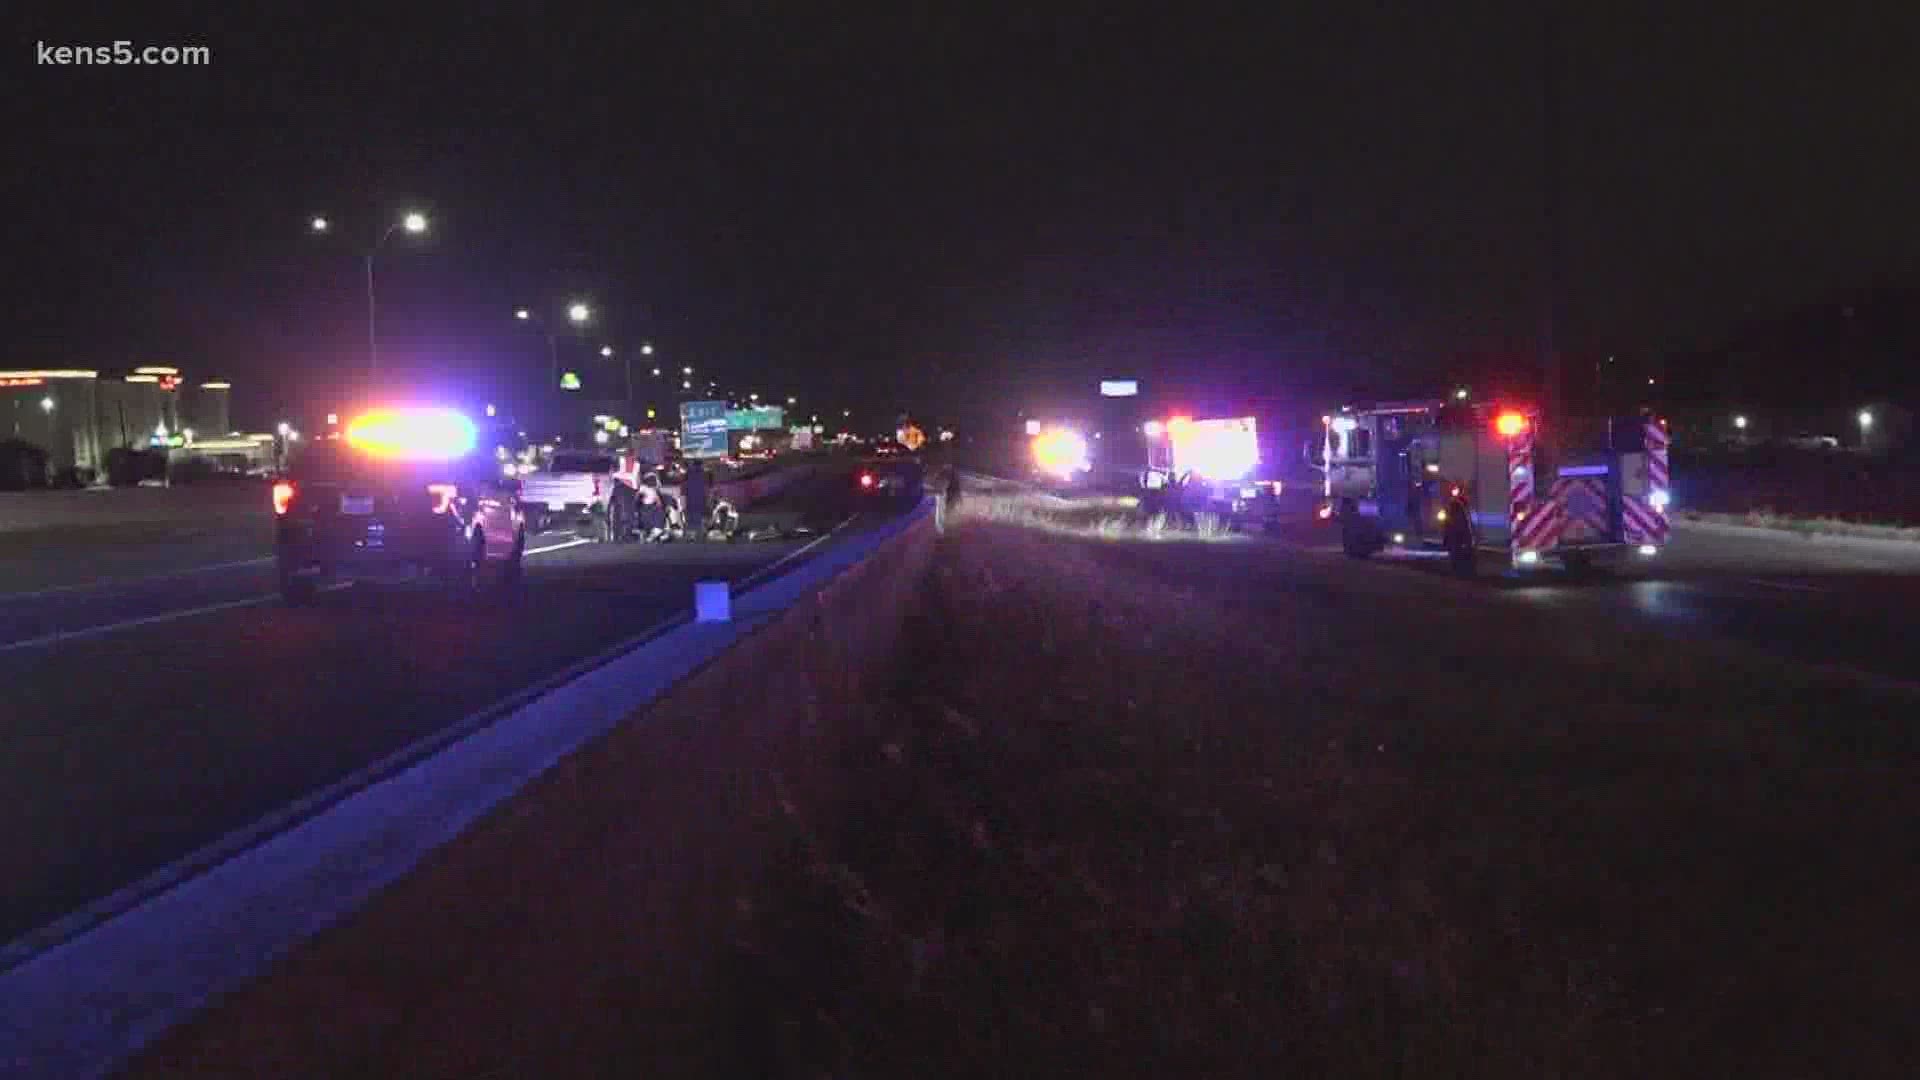 Police say that a man was crossing I-35 South near Eisenhauer around 4:30 a.m. when he was hit by a car.